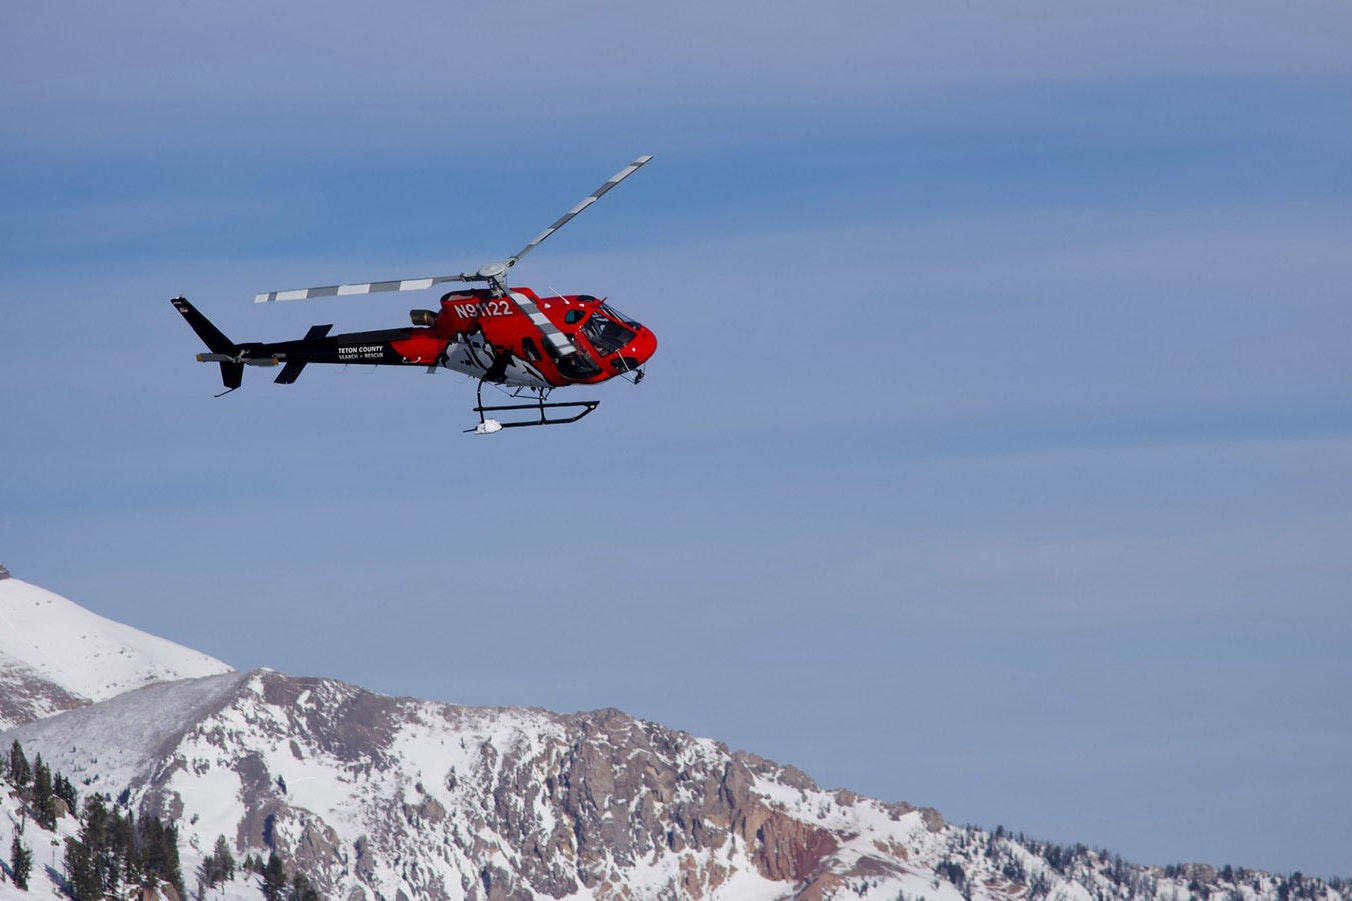 A Teton County Search and Rescue helicopter on its way to Prater Canyon to retrieve a skier caught in an avalanche.